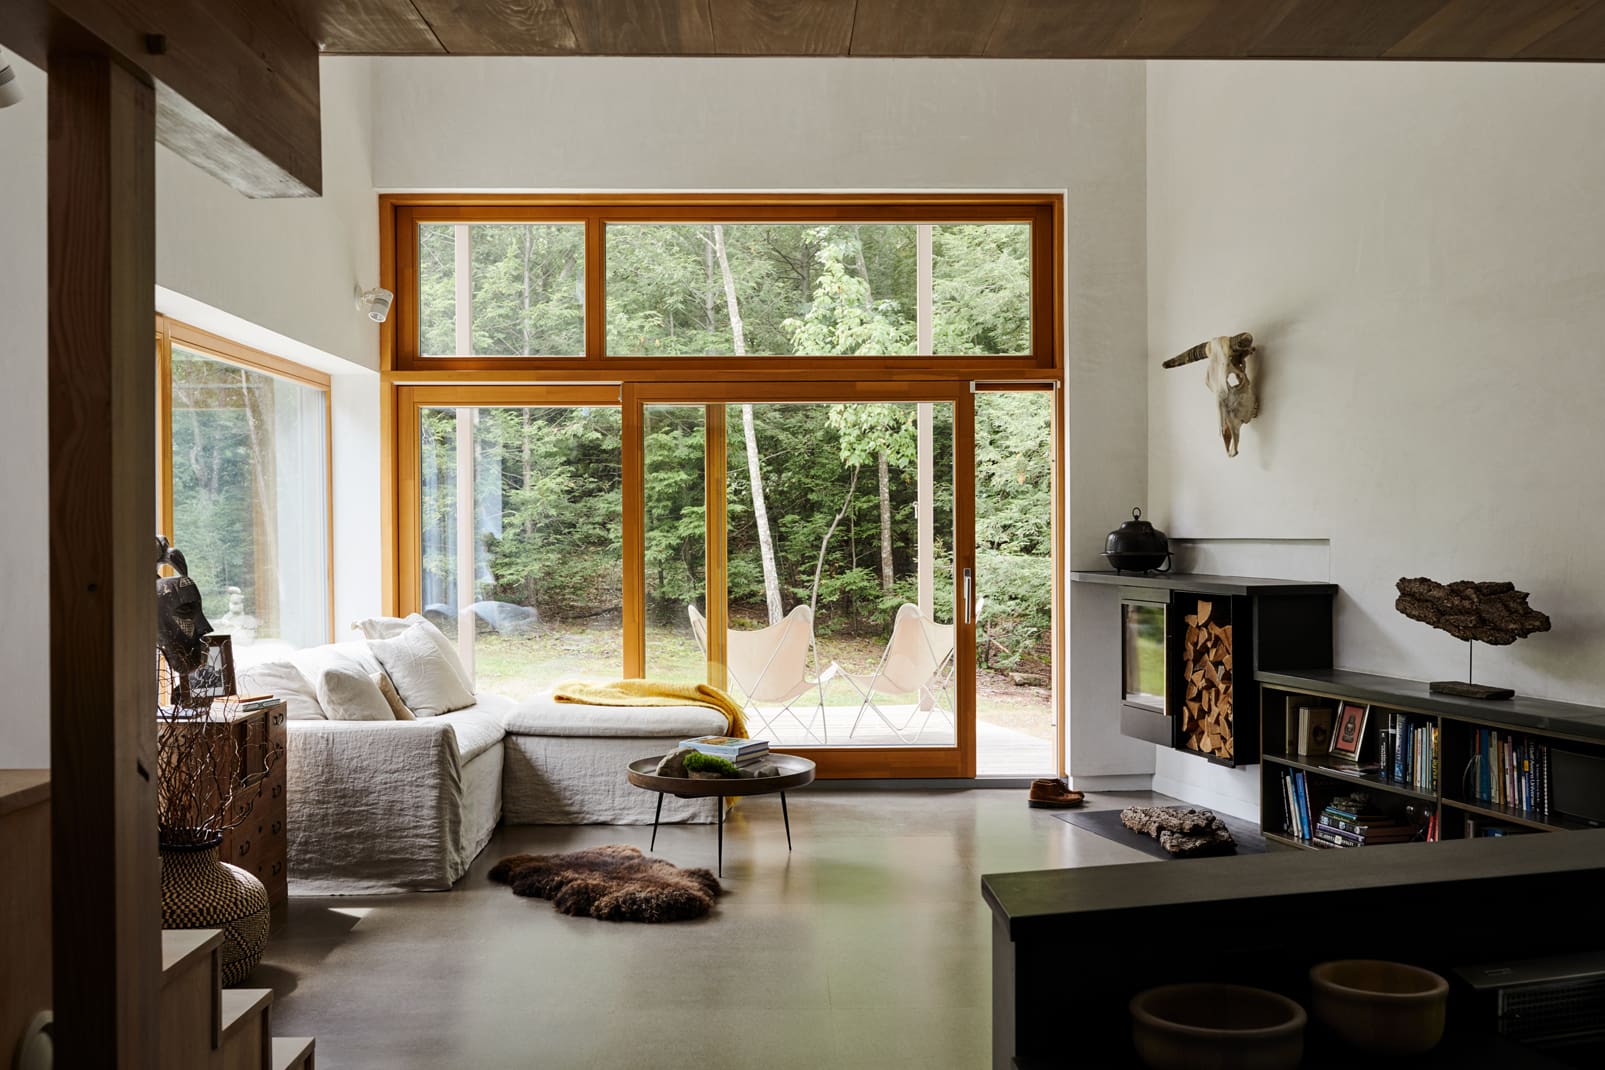 A modest, open living room with large glass sliding doors looking out to the deck and the woods beyond